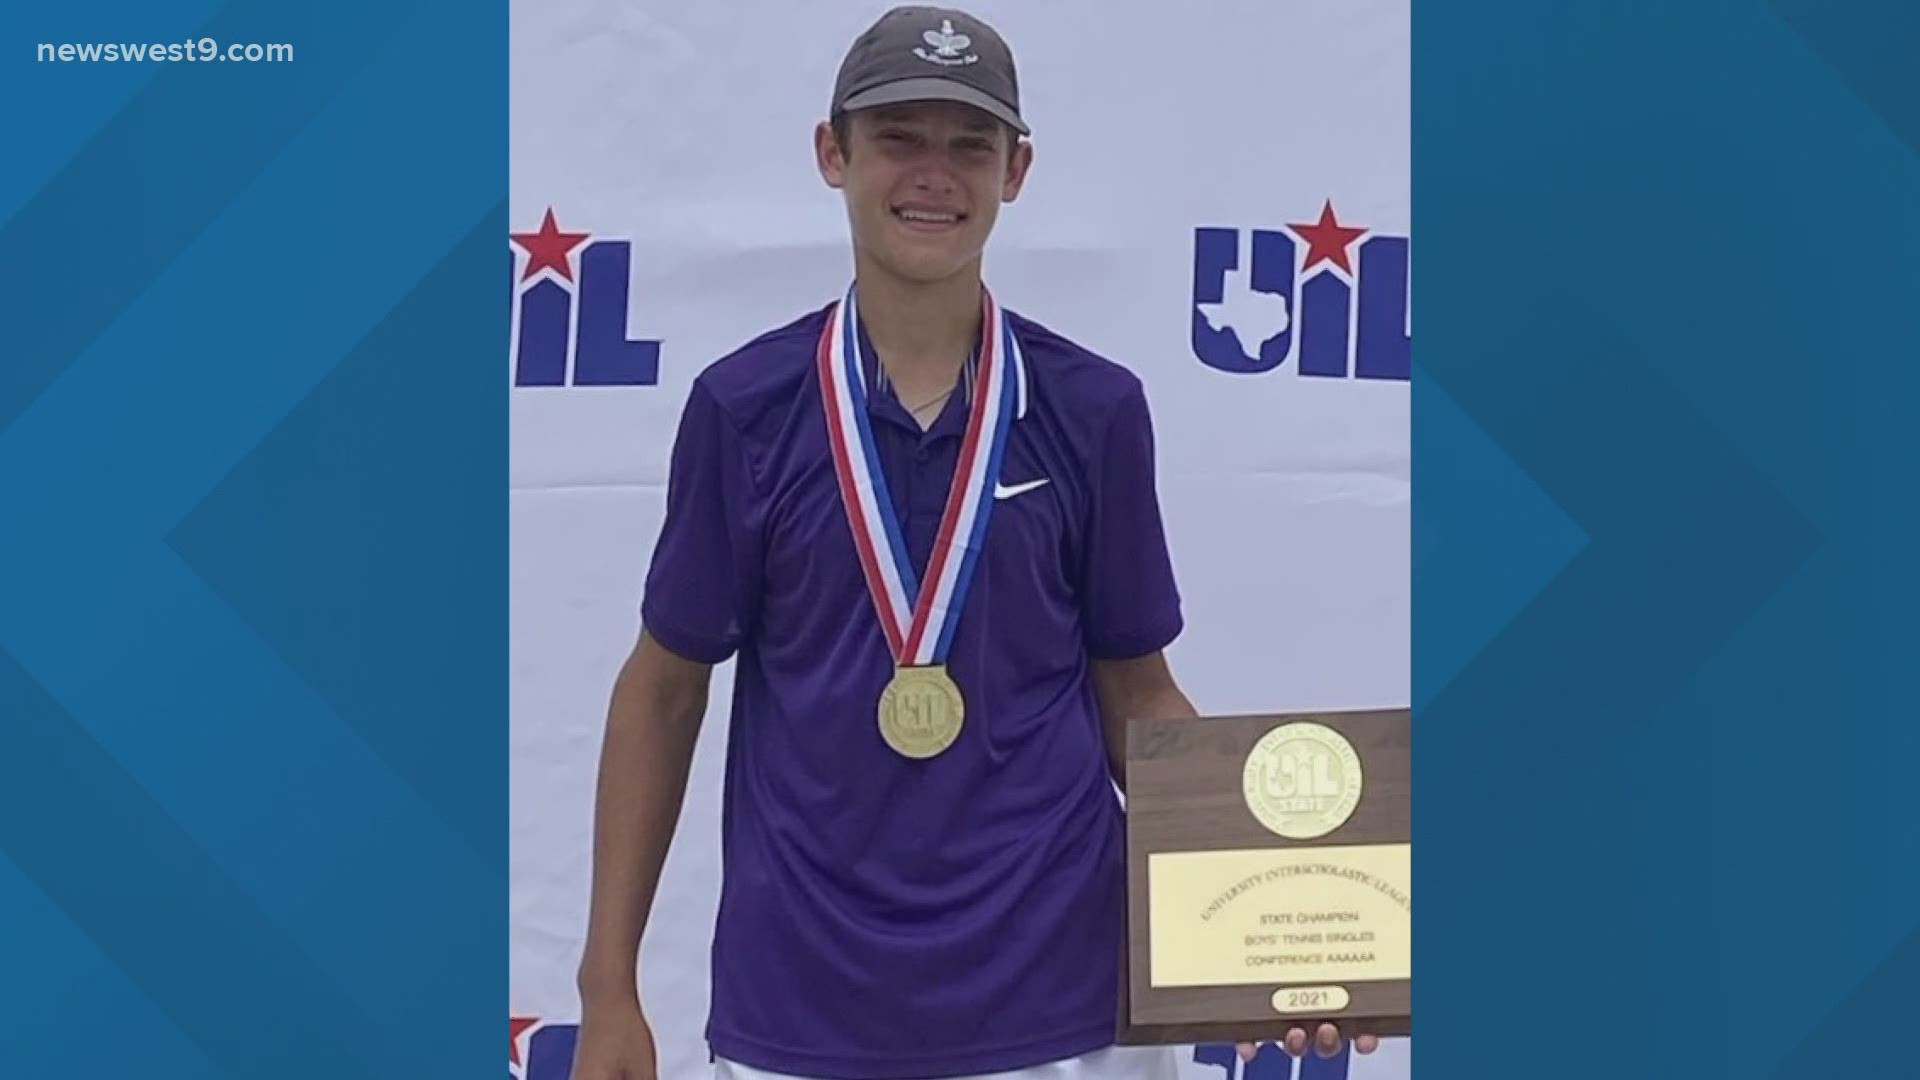 Stewart is the first MISD player to win the singles event